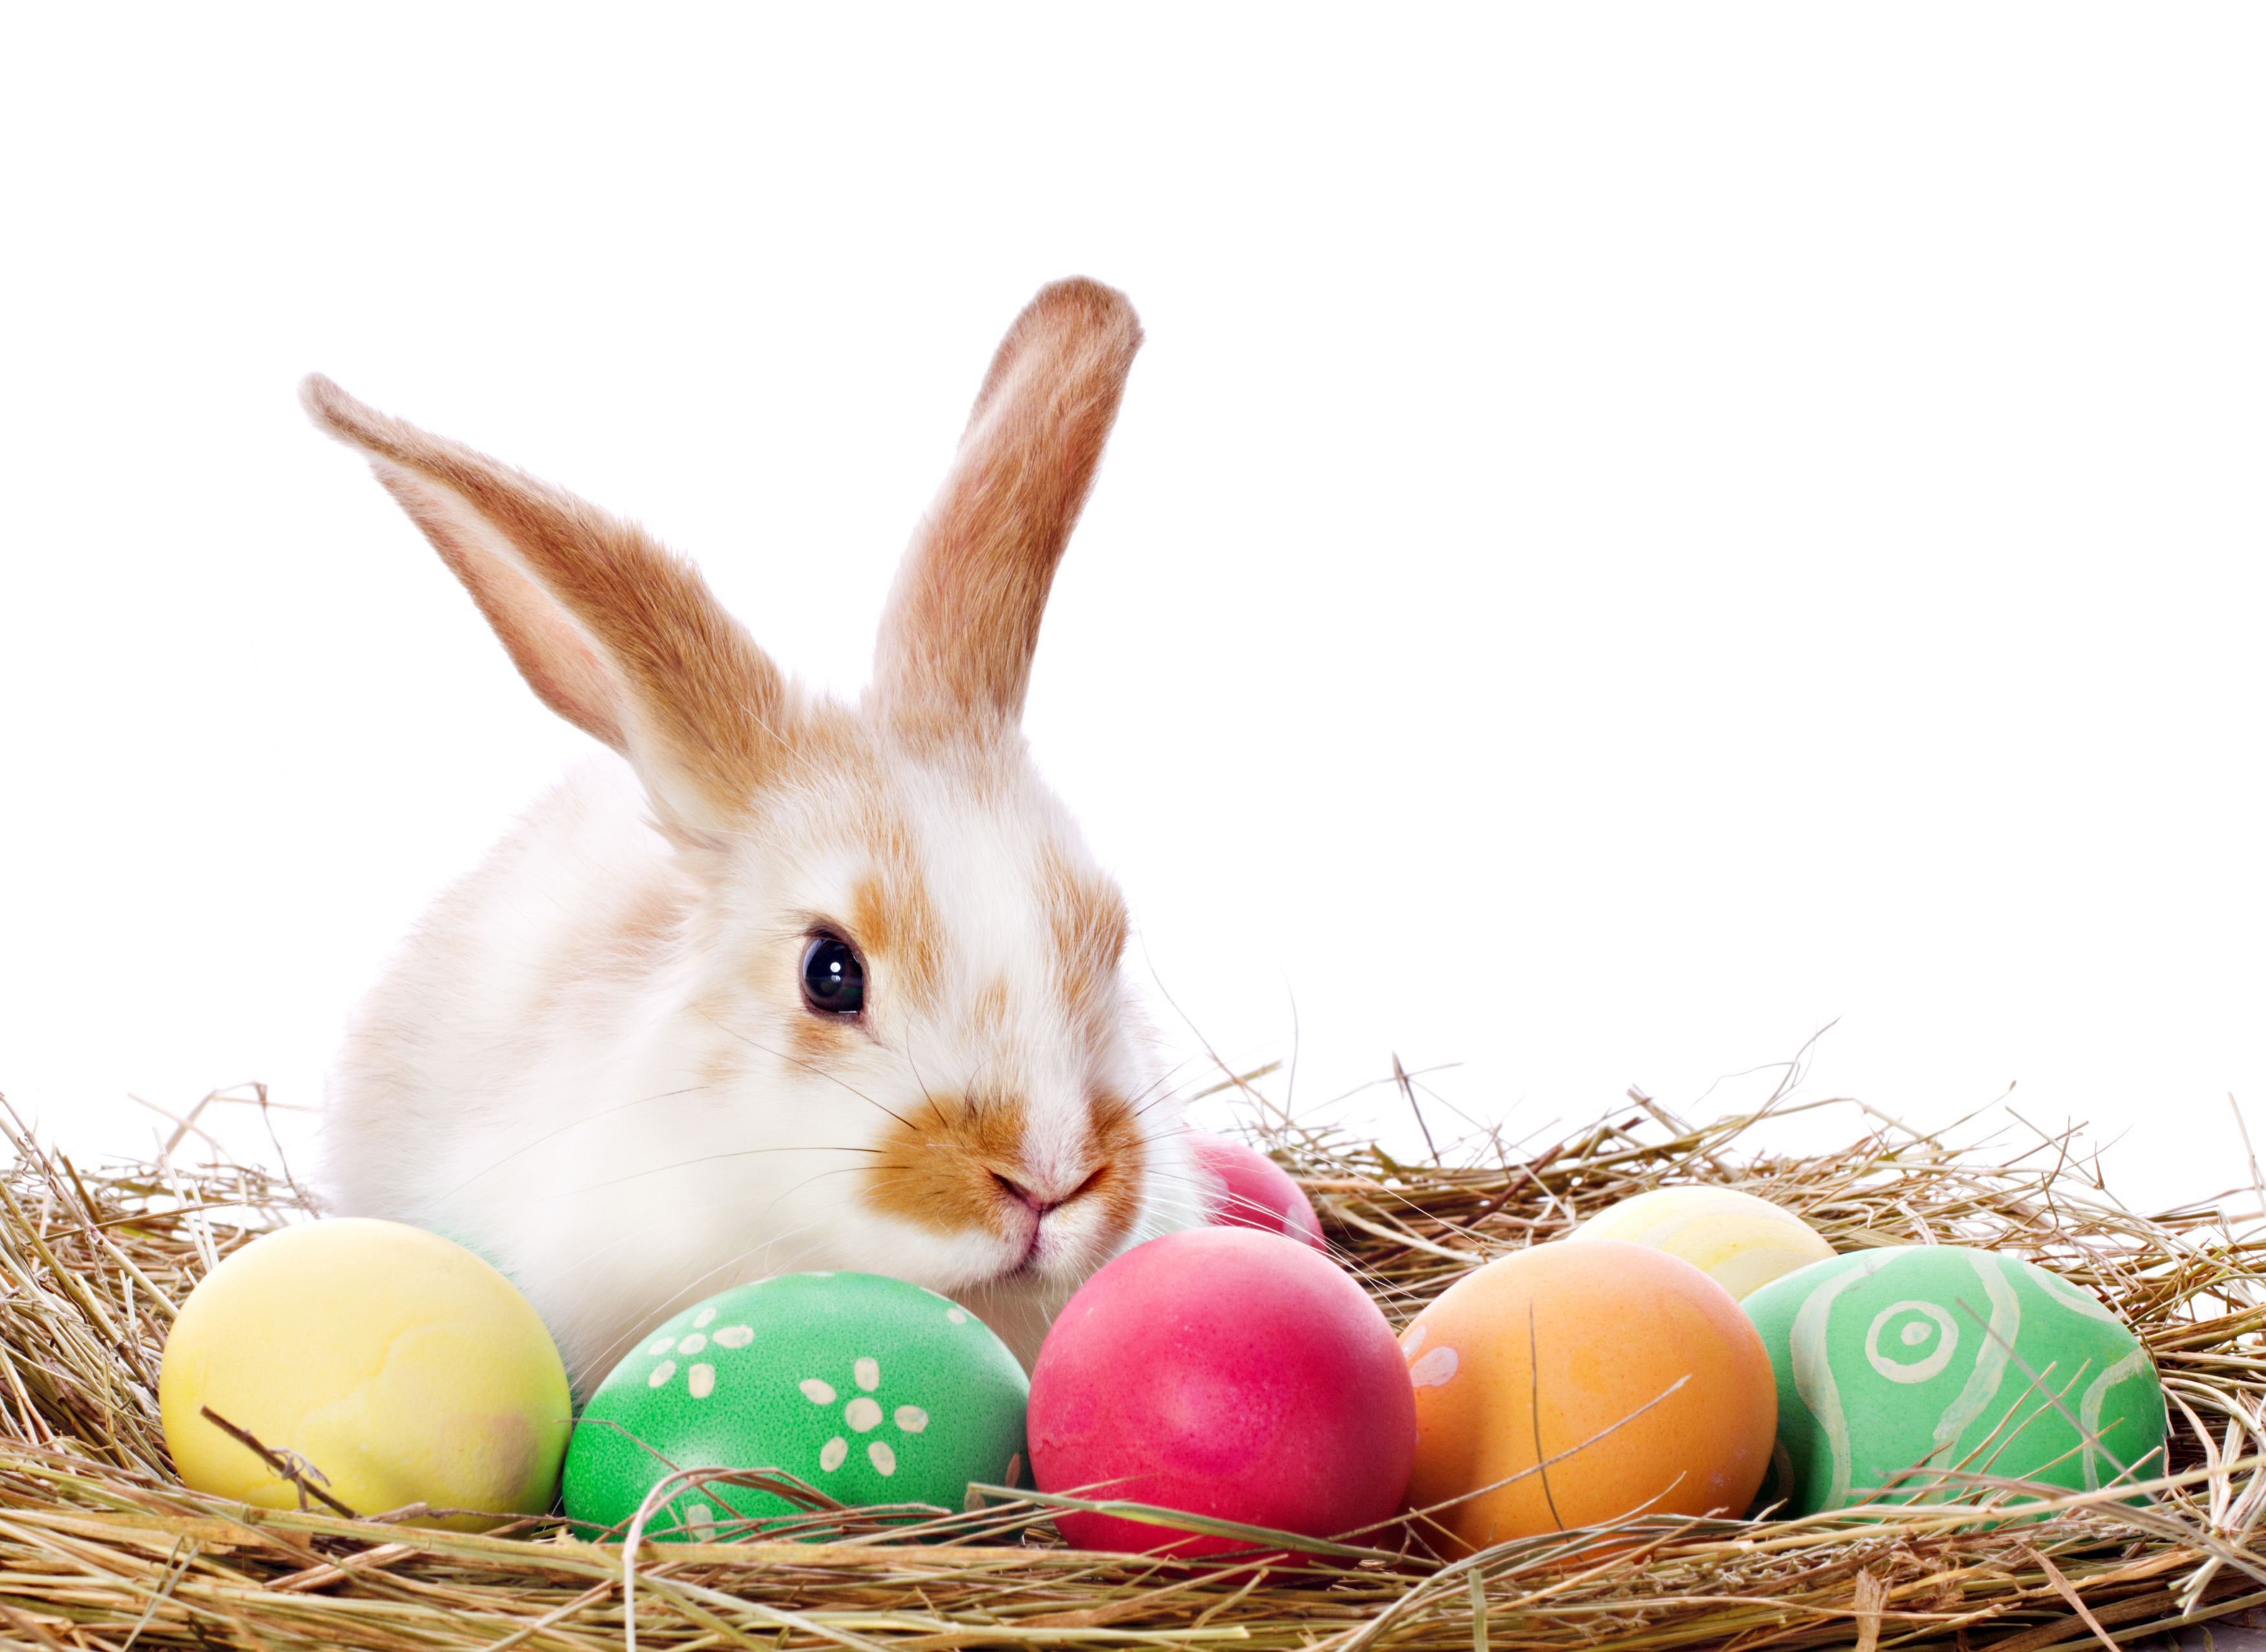 Happy Easter! We have some last minute openings today, so book